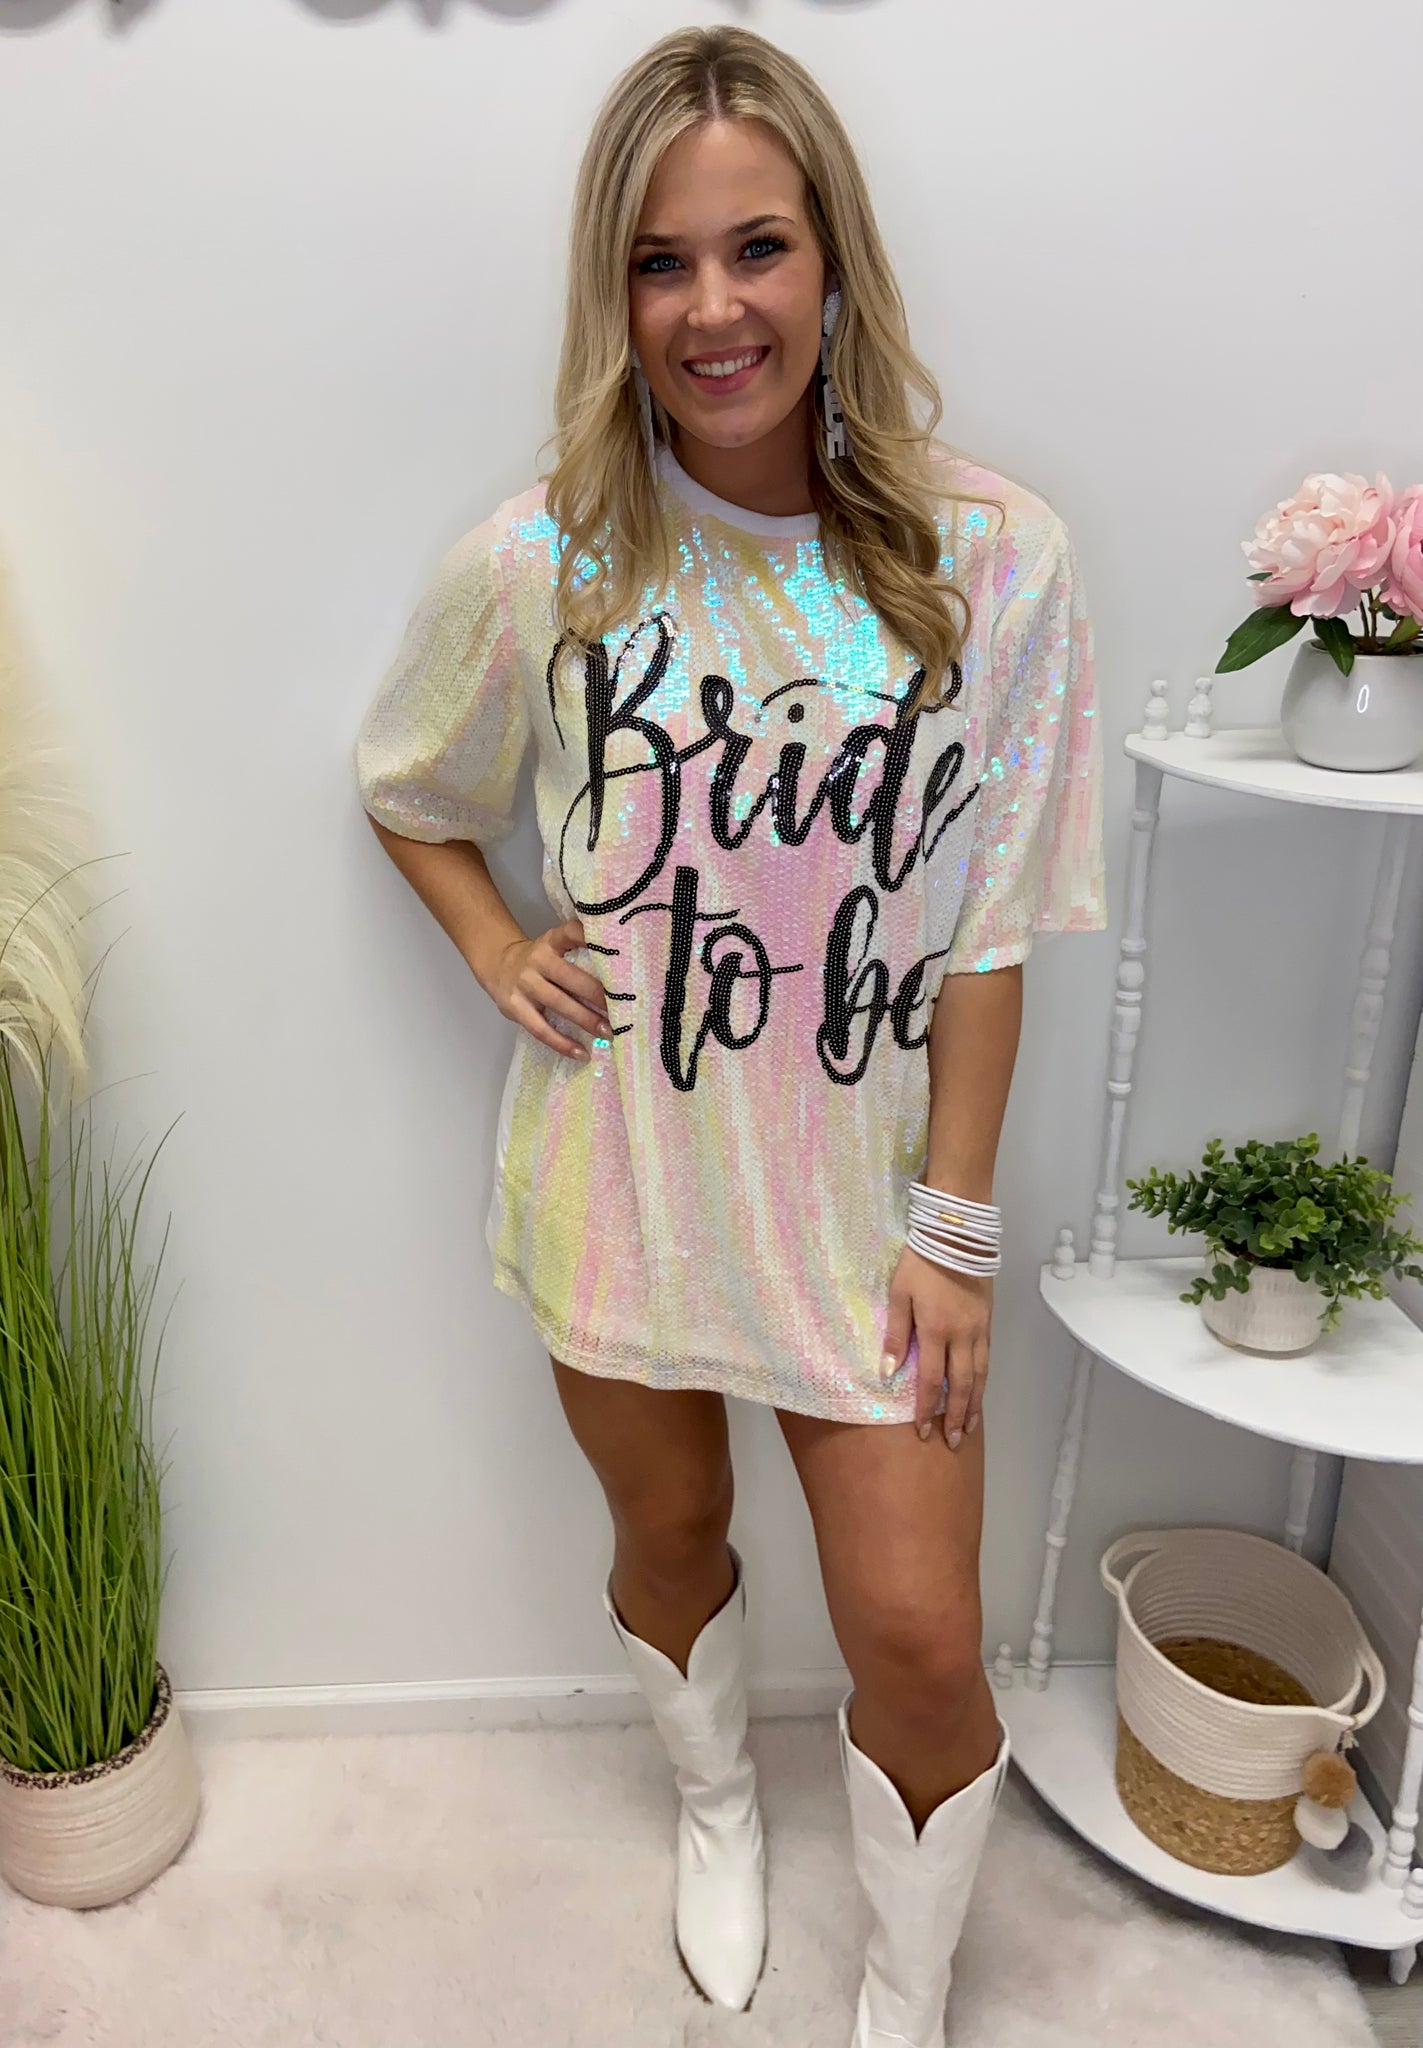 Bride To Be Sequin Dress